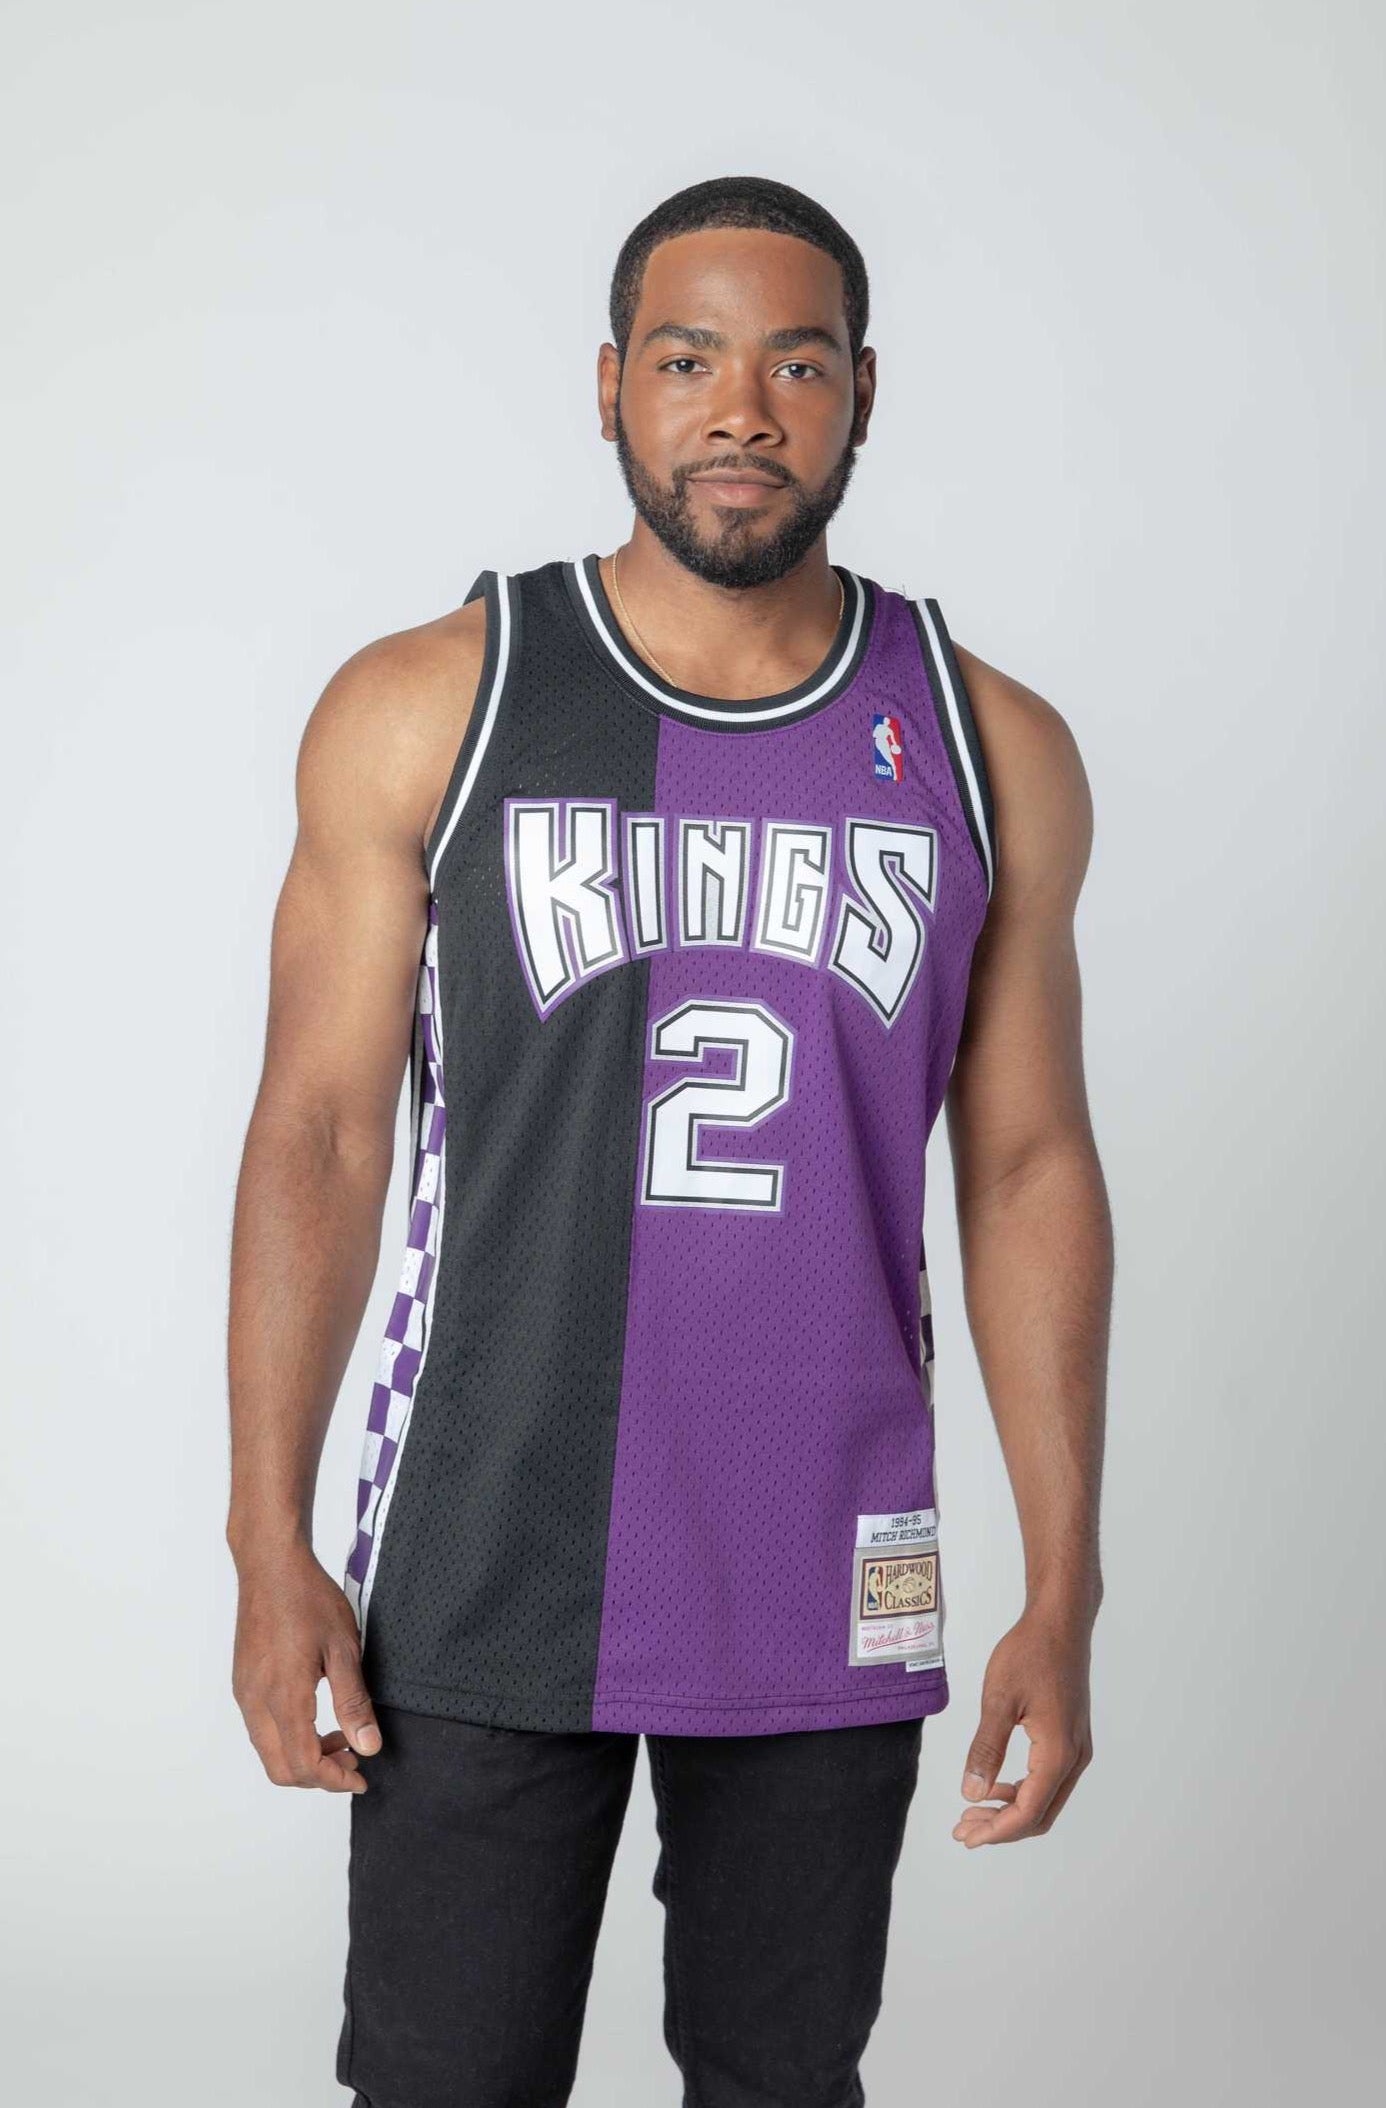 Sacramento Kings: Which Jersey/Color Scheme Is The Best?